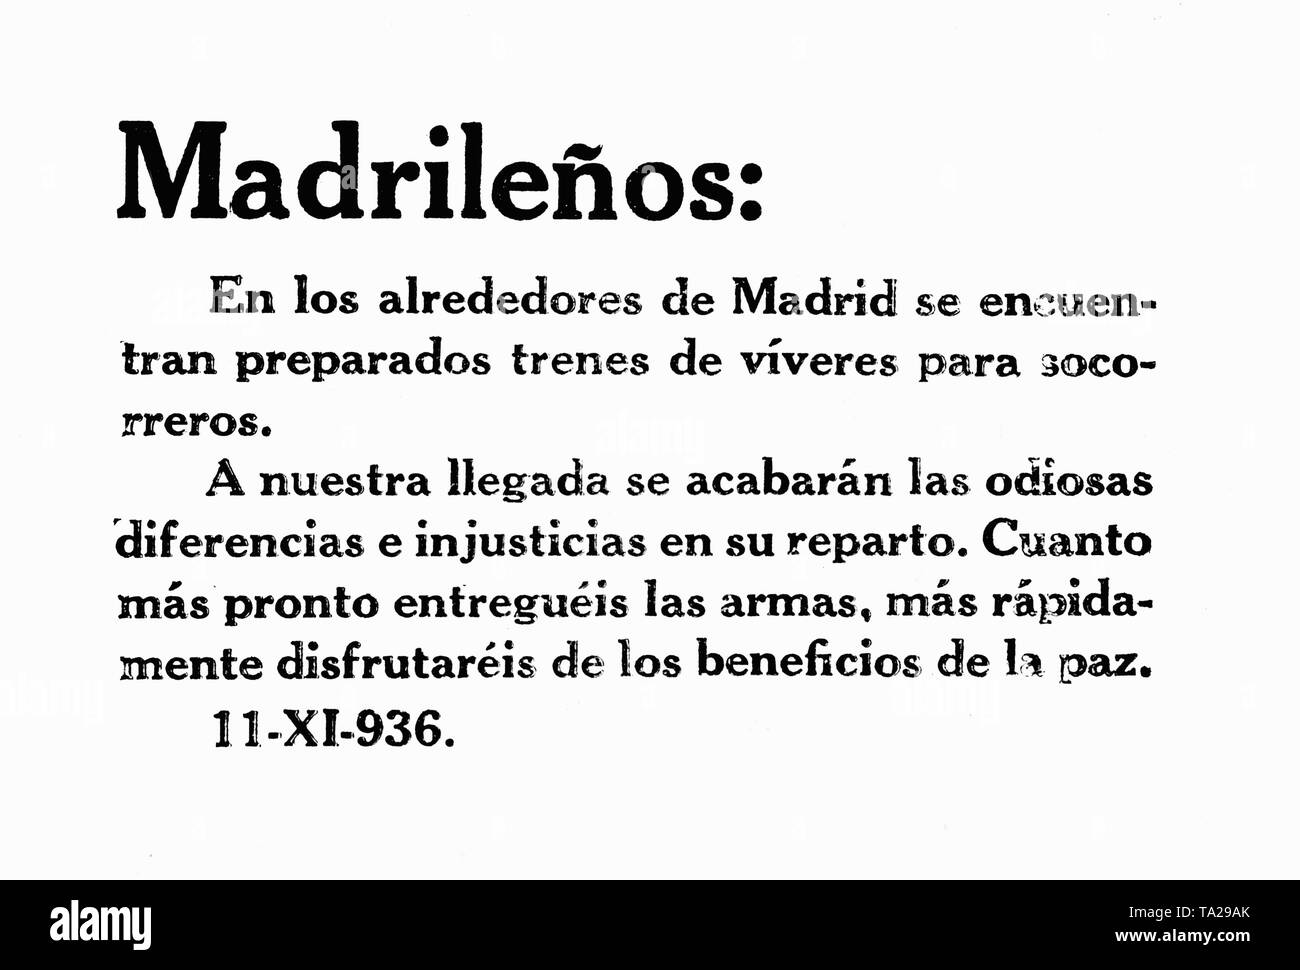 Print of a Spanish national pamphlet to throw over the besieged Madrid on November 11, 1936. English translation: 'Citizens of Madrid: In the neighbourhood, there are trains that provide food for help. On our arrival in Madrid, the ugly and despicable fights and injustices cease to happen. The sooner you put your arms down, the sooner you will be able to enjoy the subsidence of peace.' Since October 1936, General Francisco Franco had tried to conquer Madrid with his troops. On the 8th of November, General Emilio Mola attacked Madrid directly with his troops and laid siege to the capital. Stock Photo